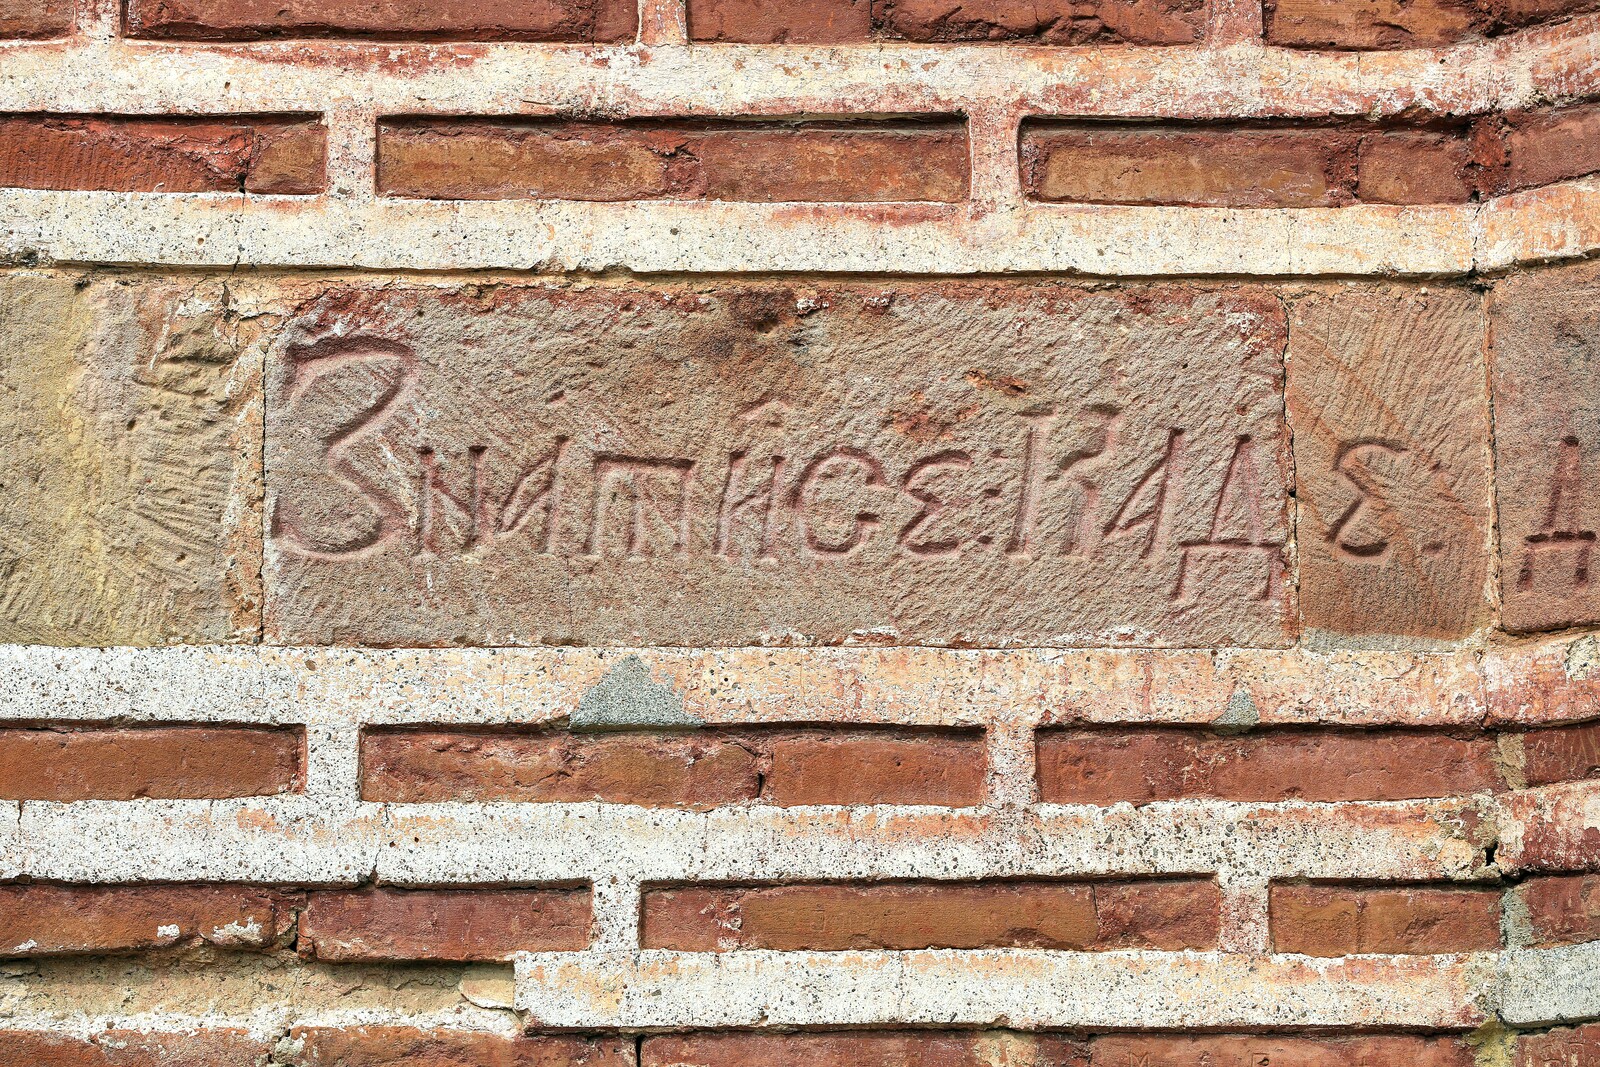 Inscription on the Deposition of the Relics of Stefan the First-Crowned and the Restoration of the Monastery by Prince Miloš